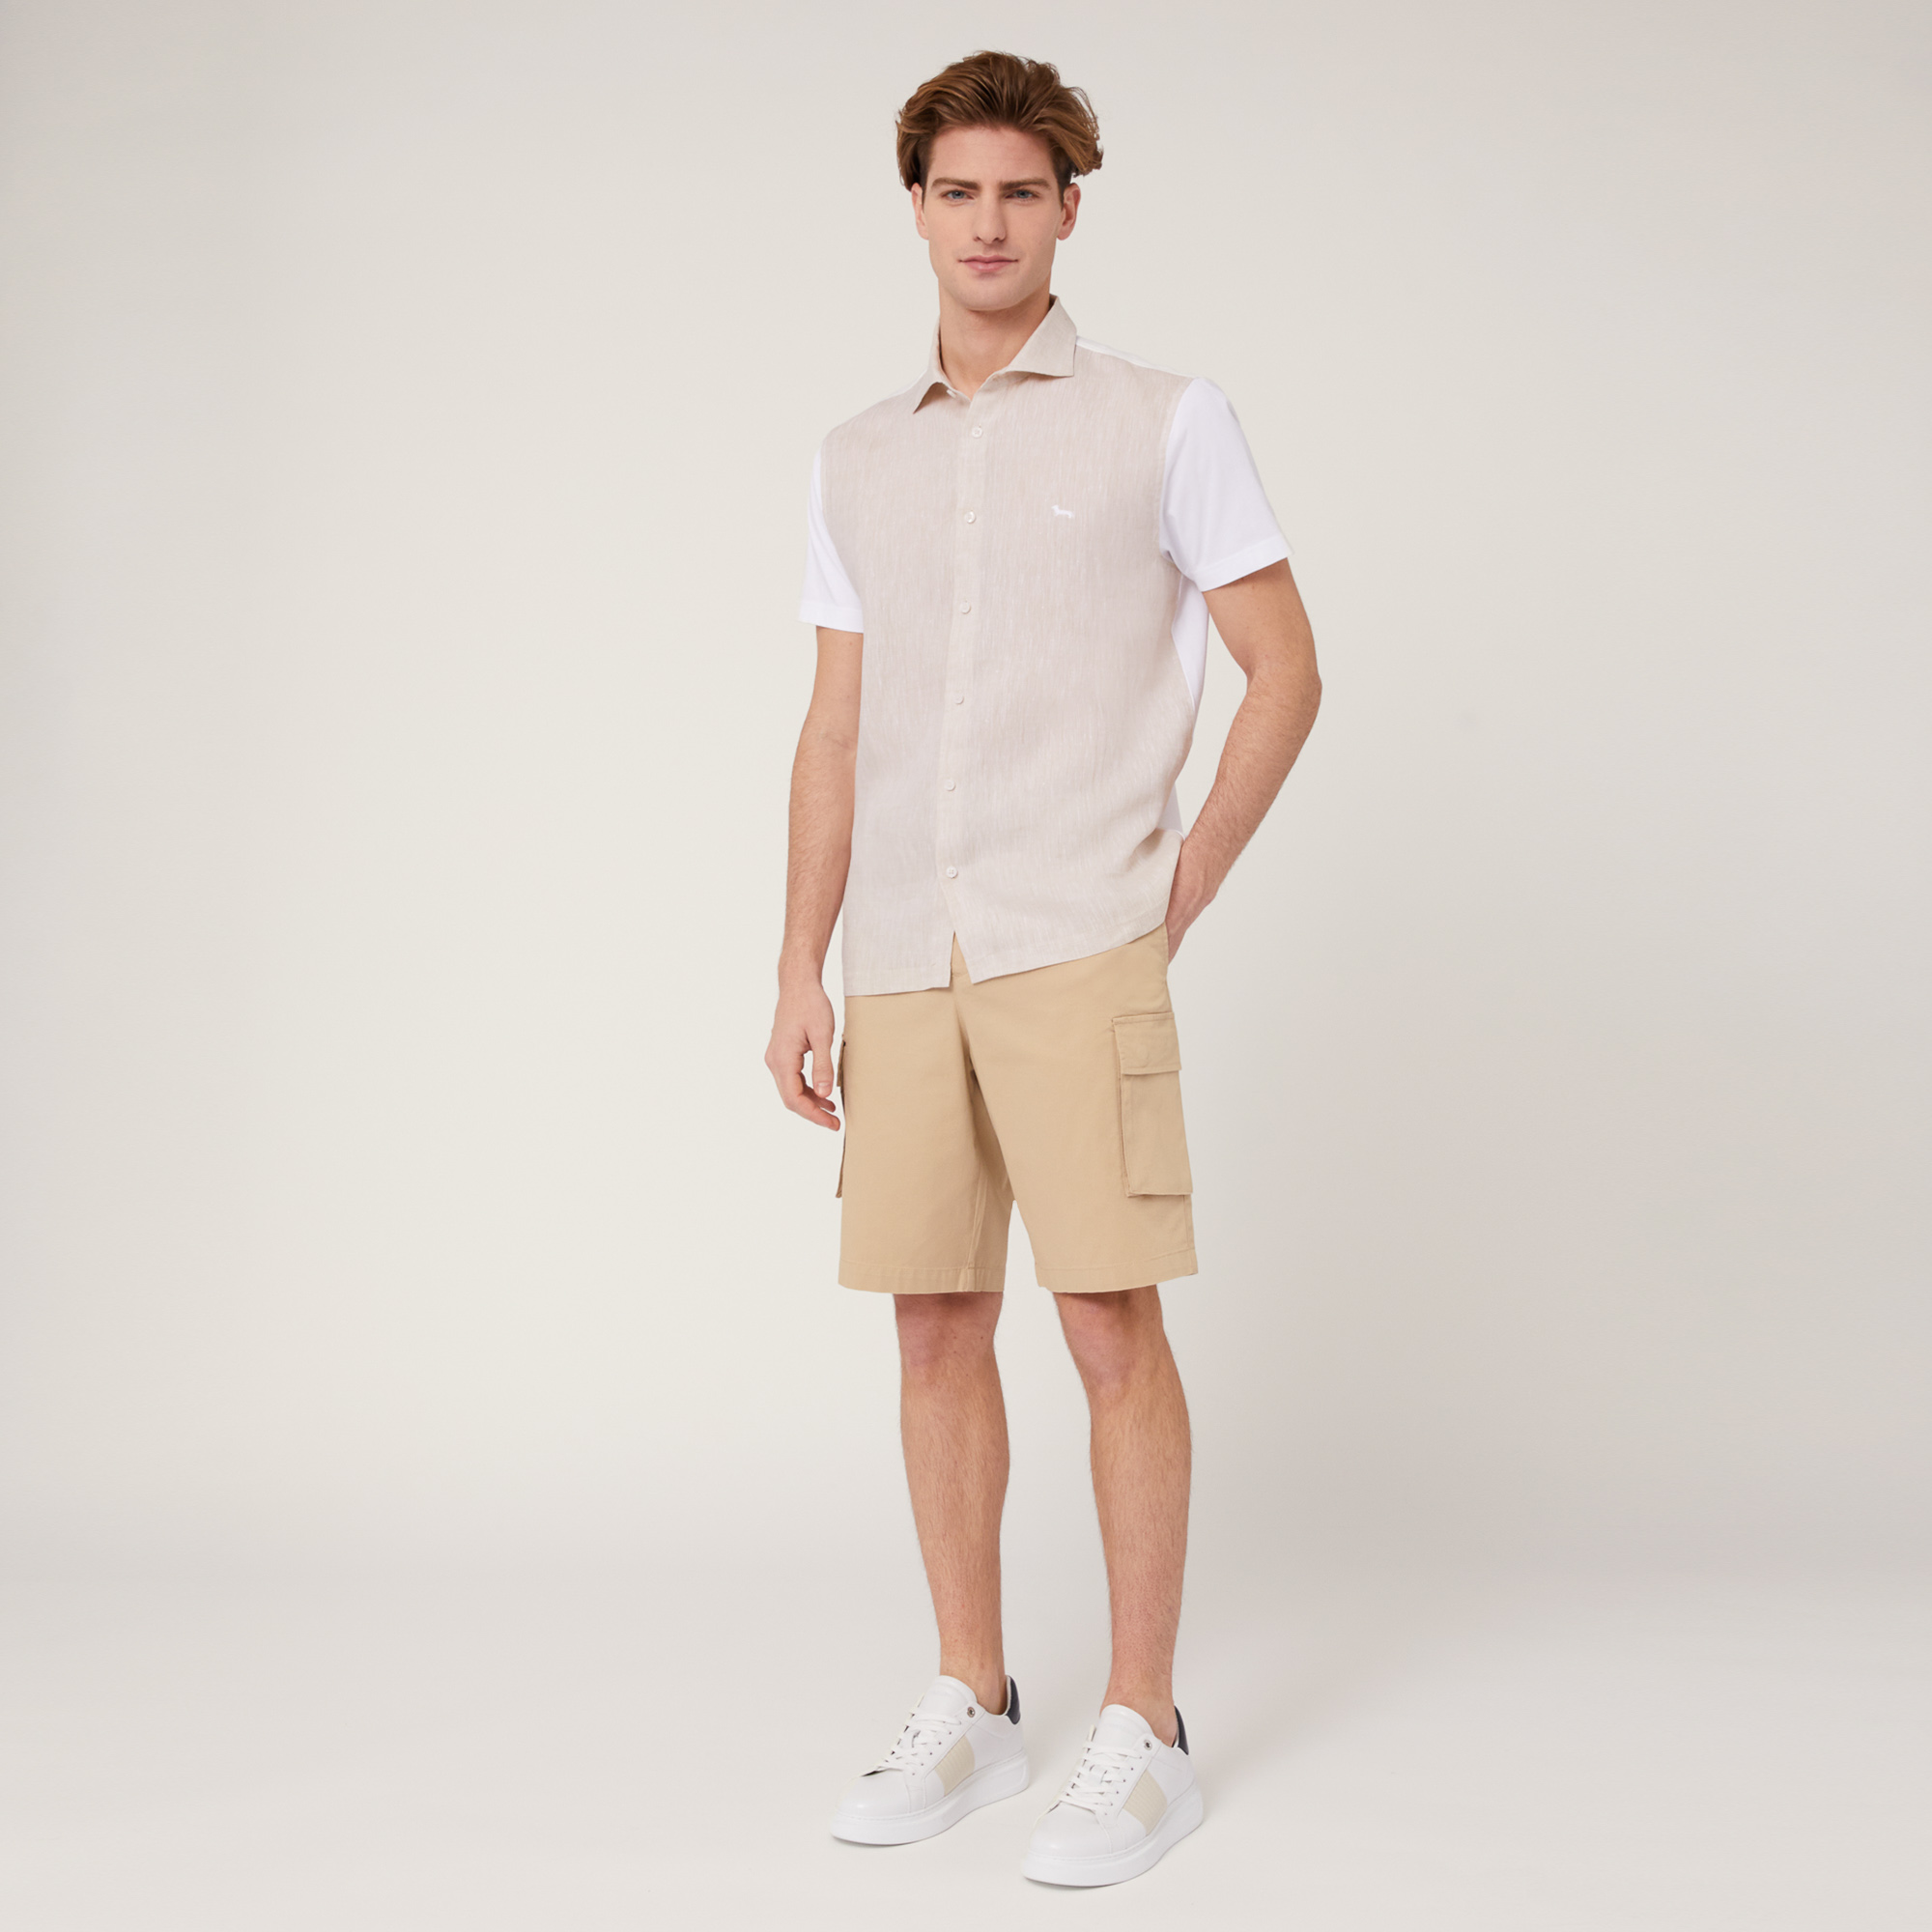 Cotton and Linen Polo Shirt, Beige, large image number 3